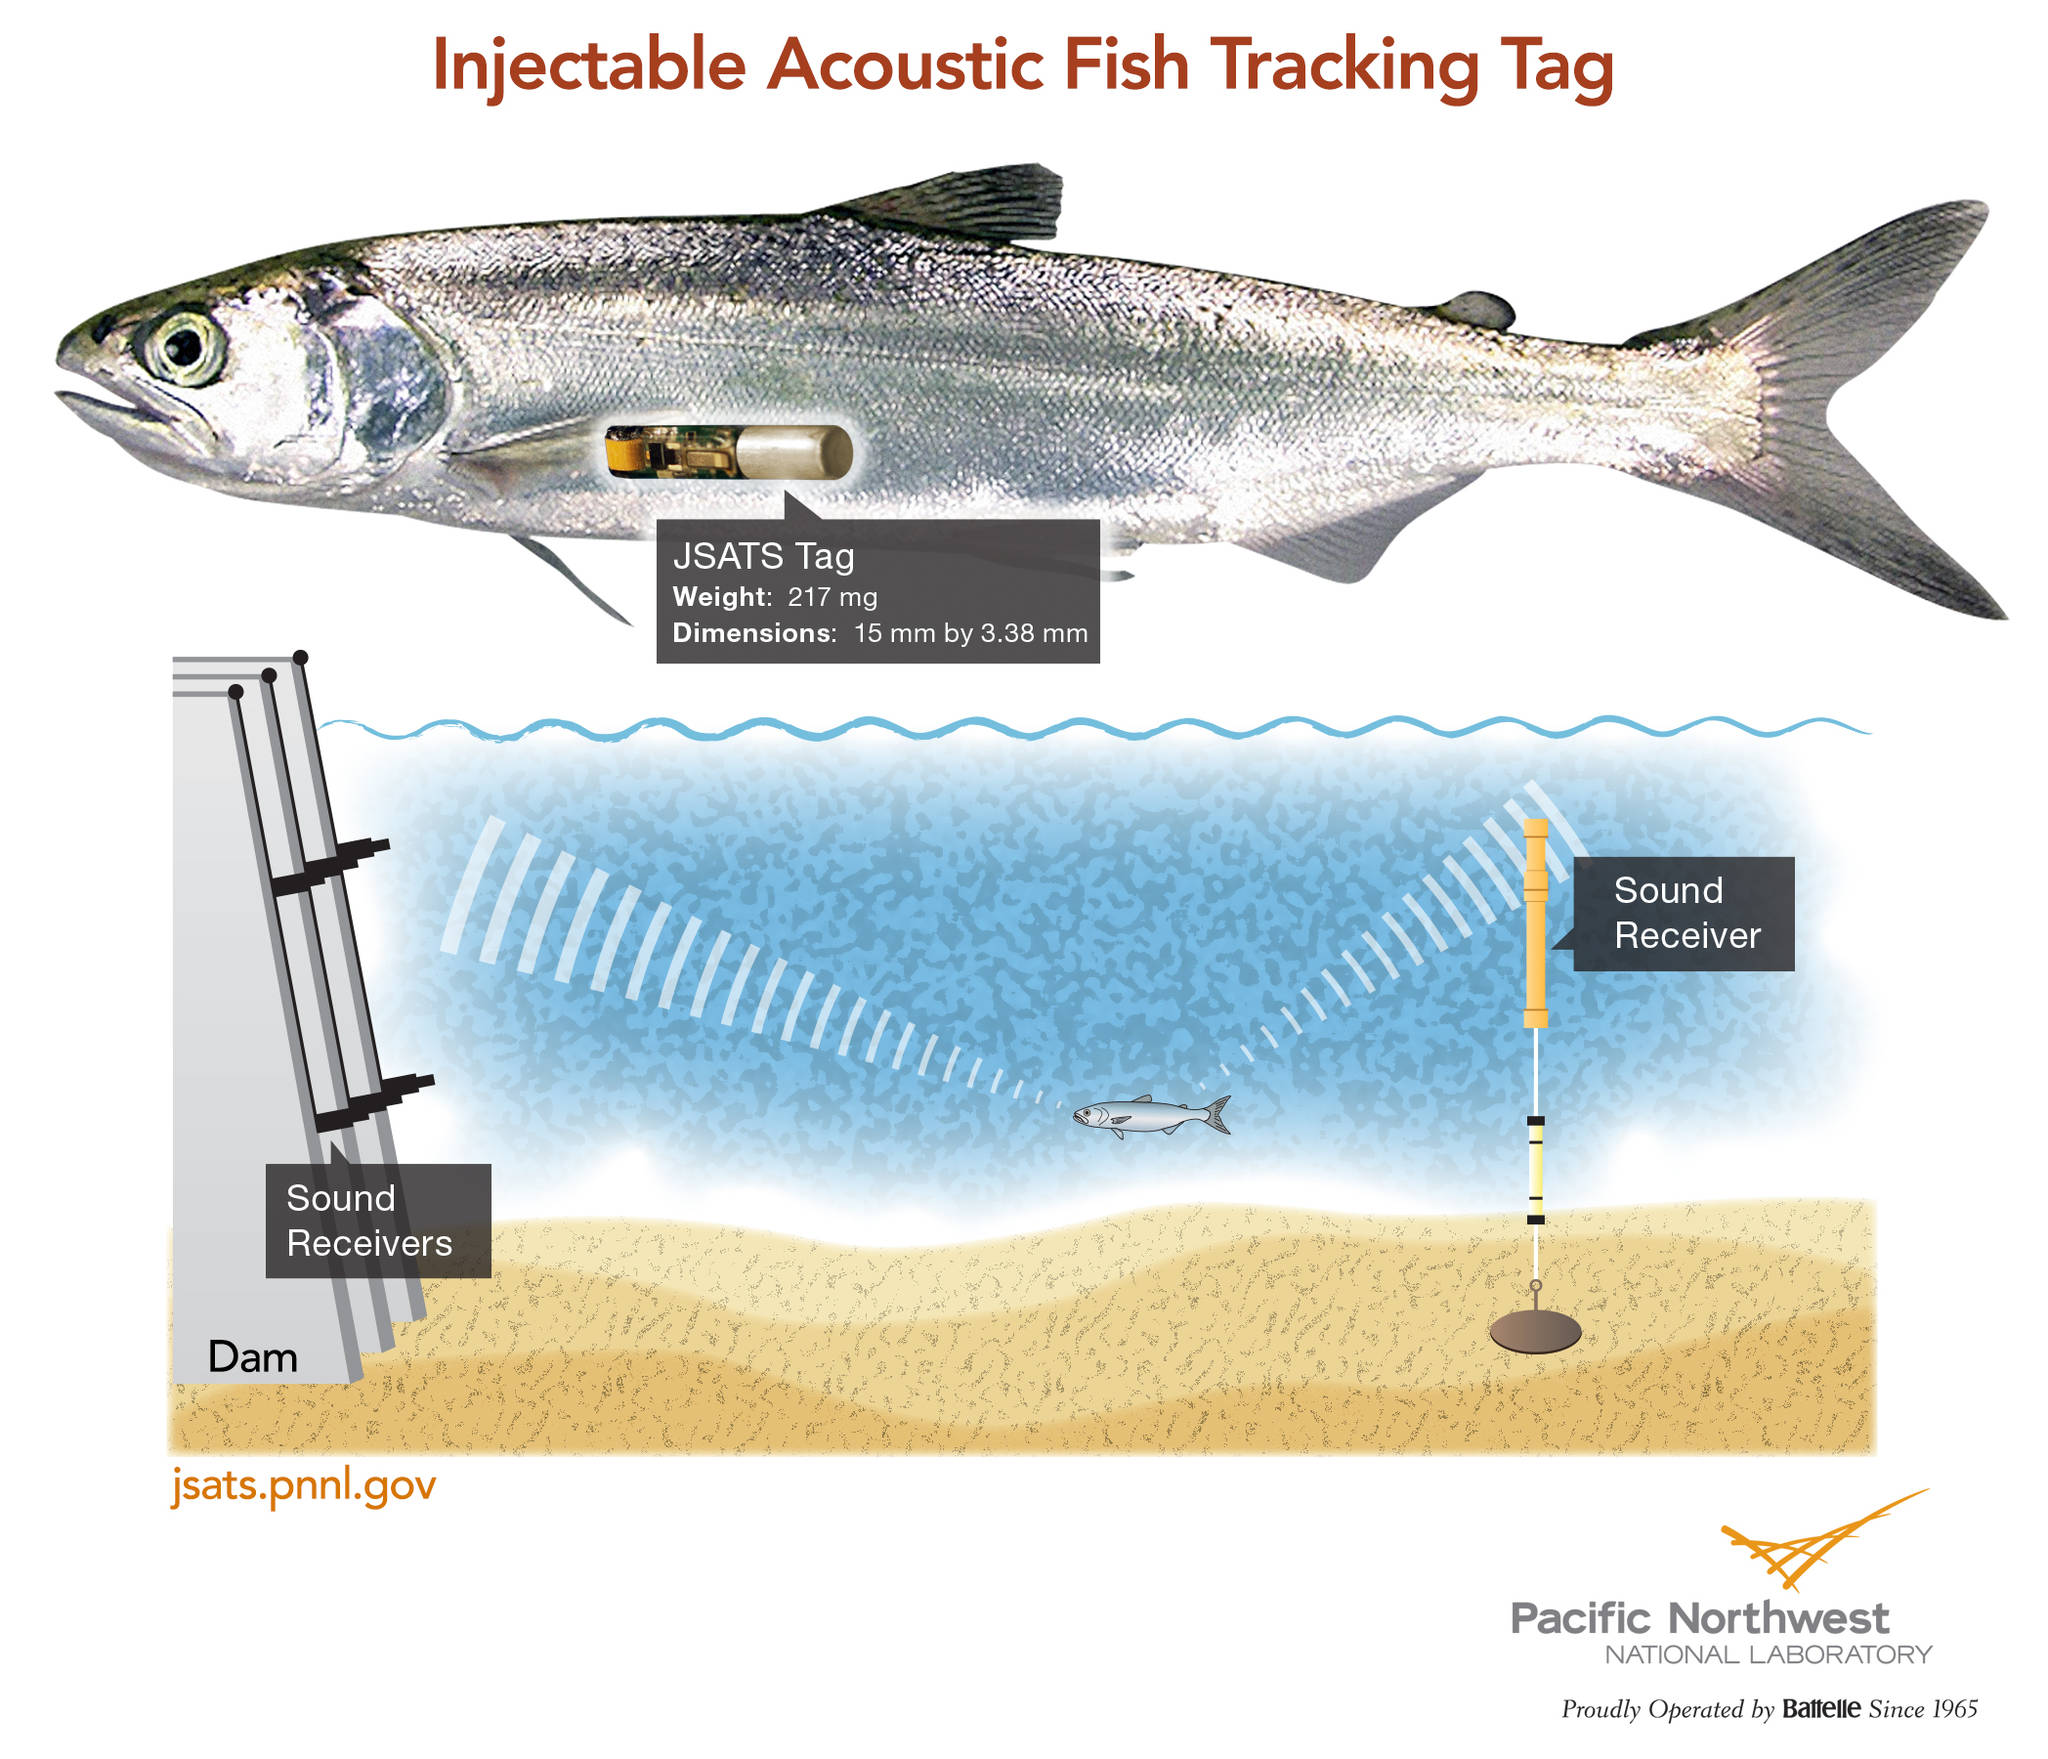 Photo courtesy of PNNL                                Scientists in Sequim’s Marine Sciences Laboratory with Pacific Northwest National Laboratory plan to monitor fish with an injectable acoustic fish tracking tag around a tidal turbine (similarly to a dam pictured) to see how they react to the machinery with the aim to better protect them.